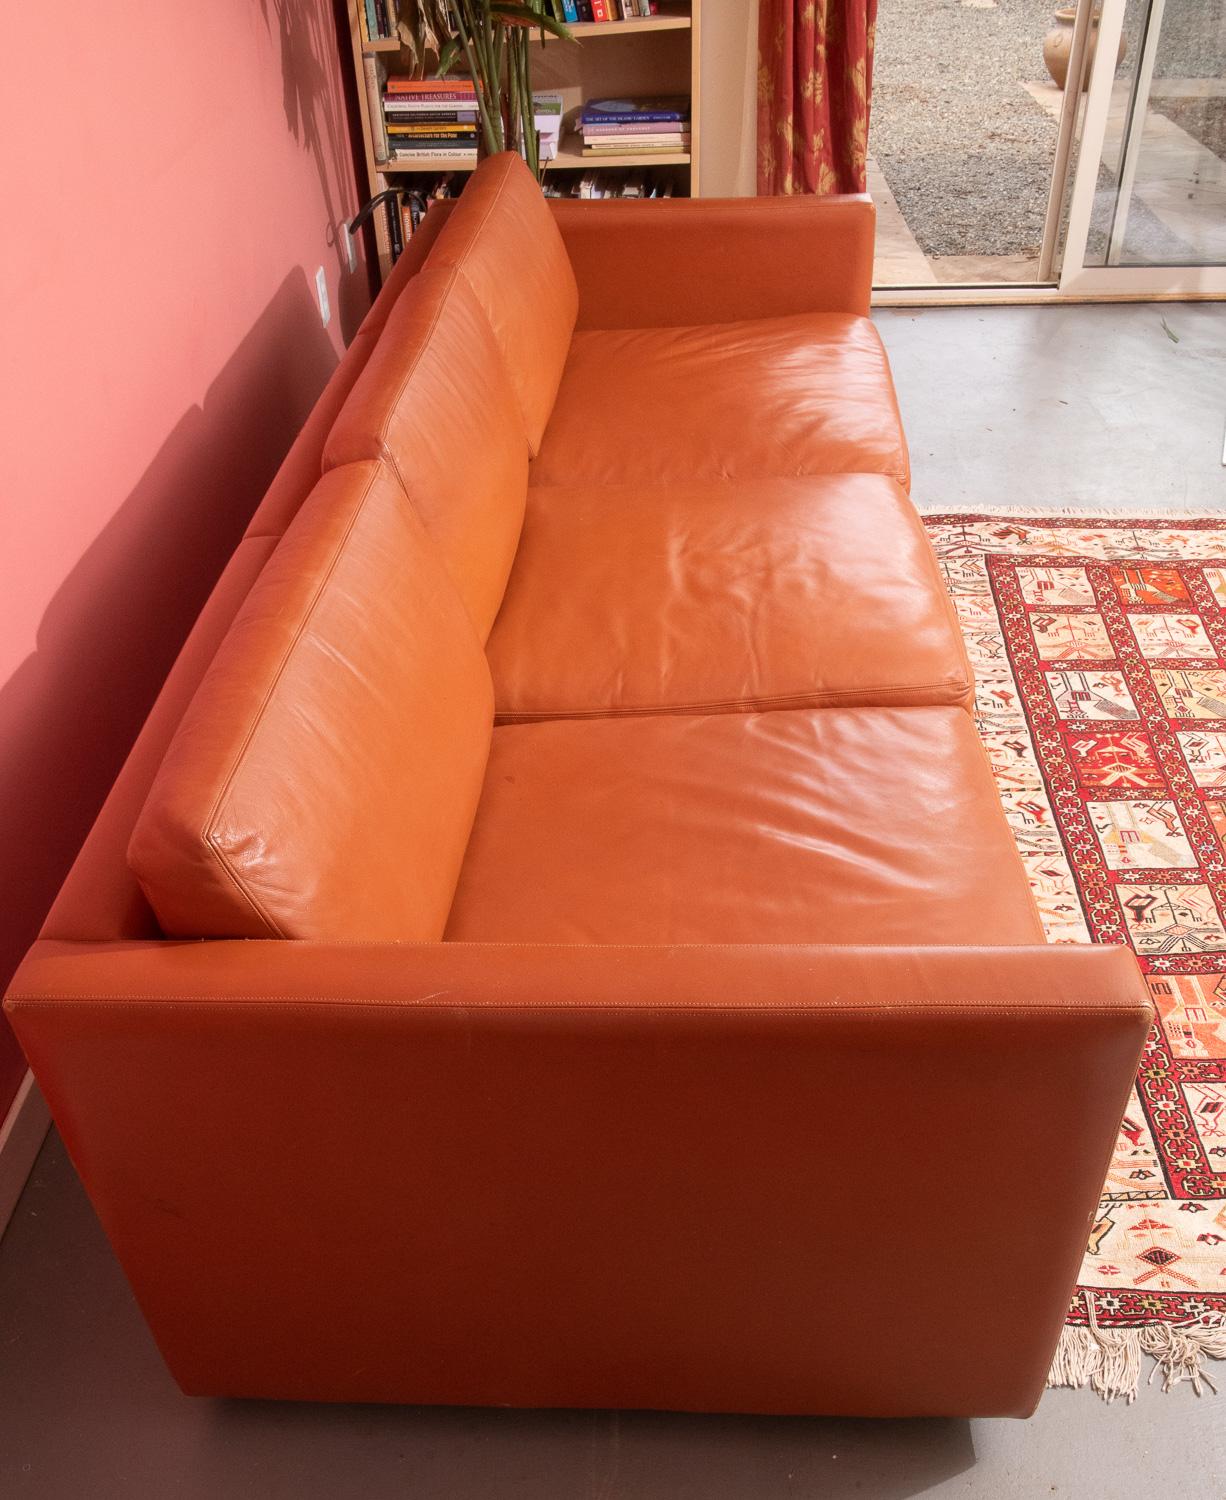 Charles Pfister designed his beautifully proportioned sofa and lounge collection in 1971. The timeless appeal and superb craftsmanship reflect his interest in 